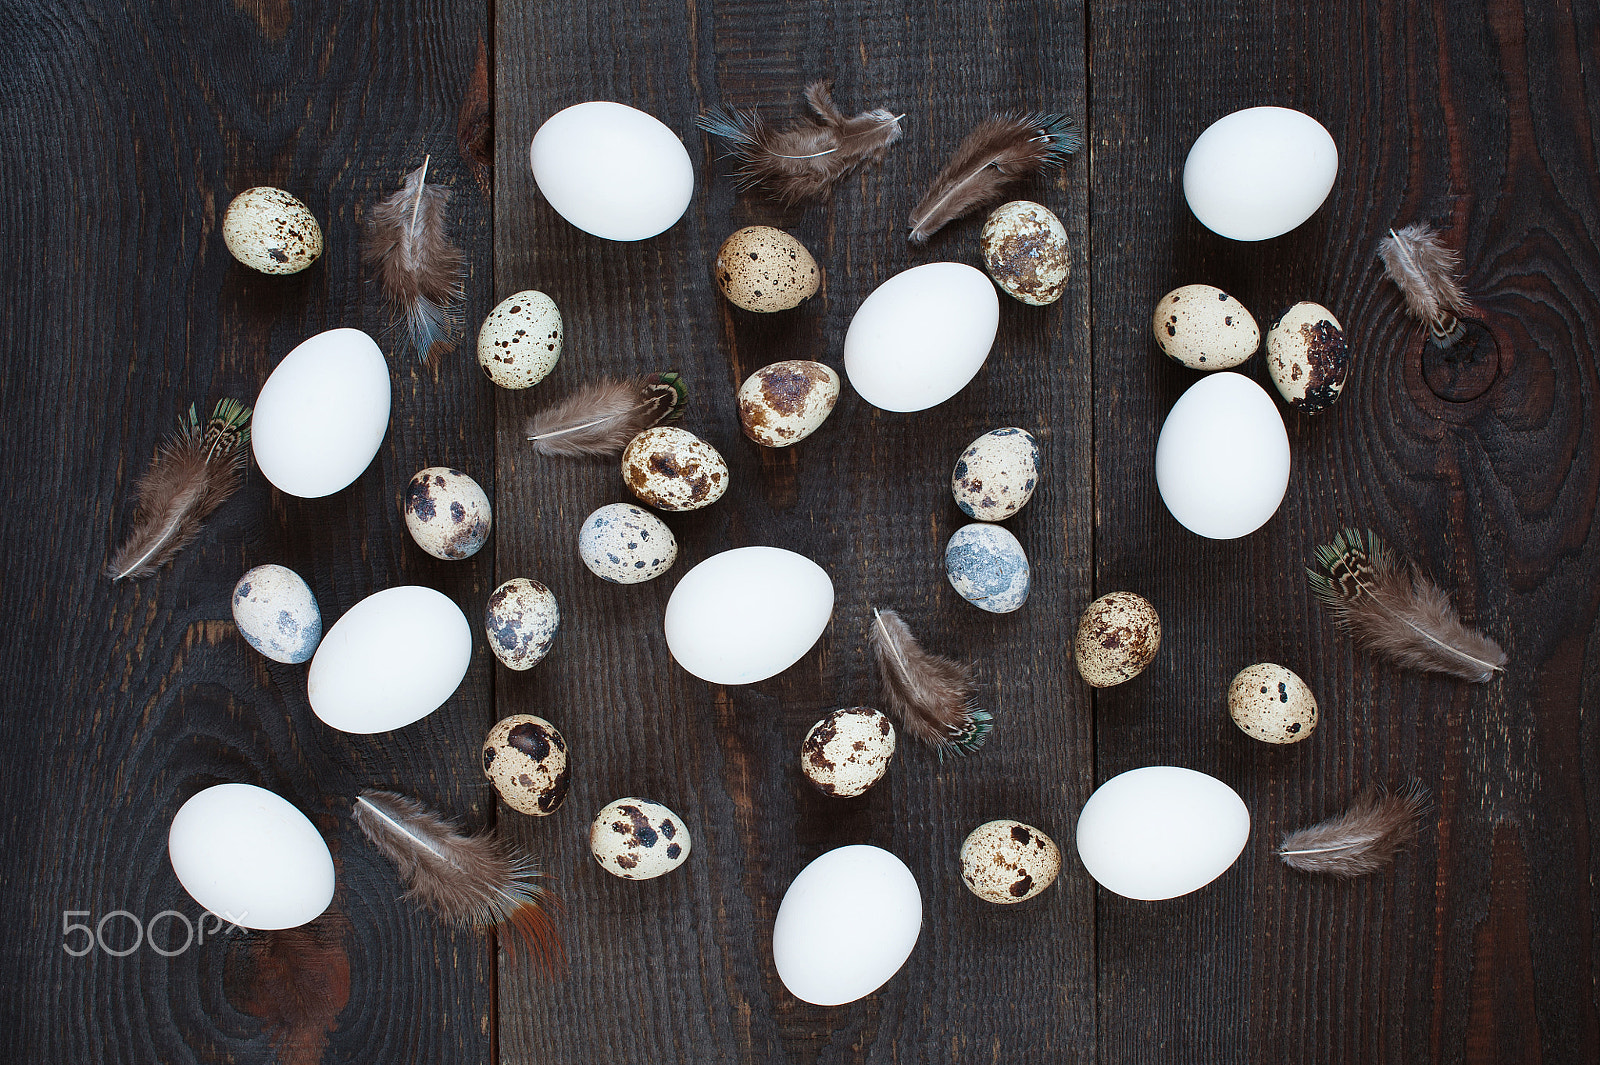 Nikon D700 sample photo. Chicken and quail eggs scattered on the brown wooden table photography